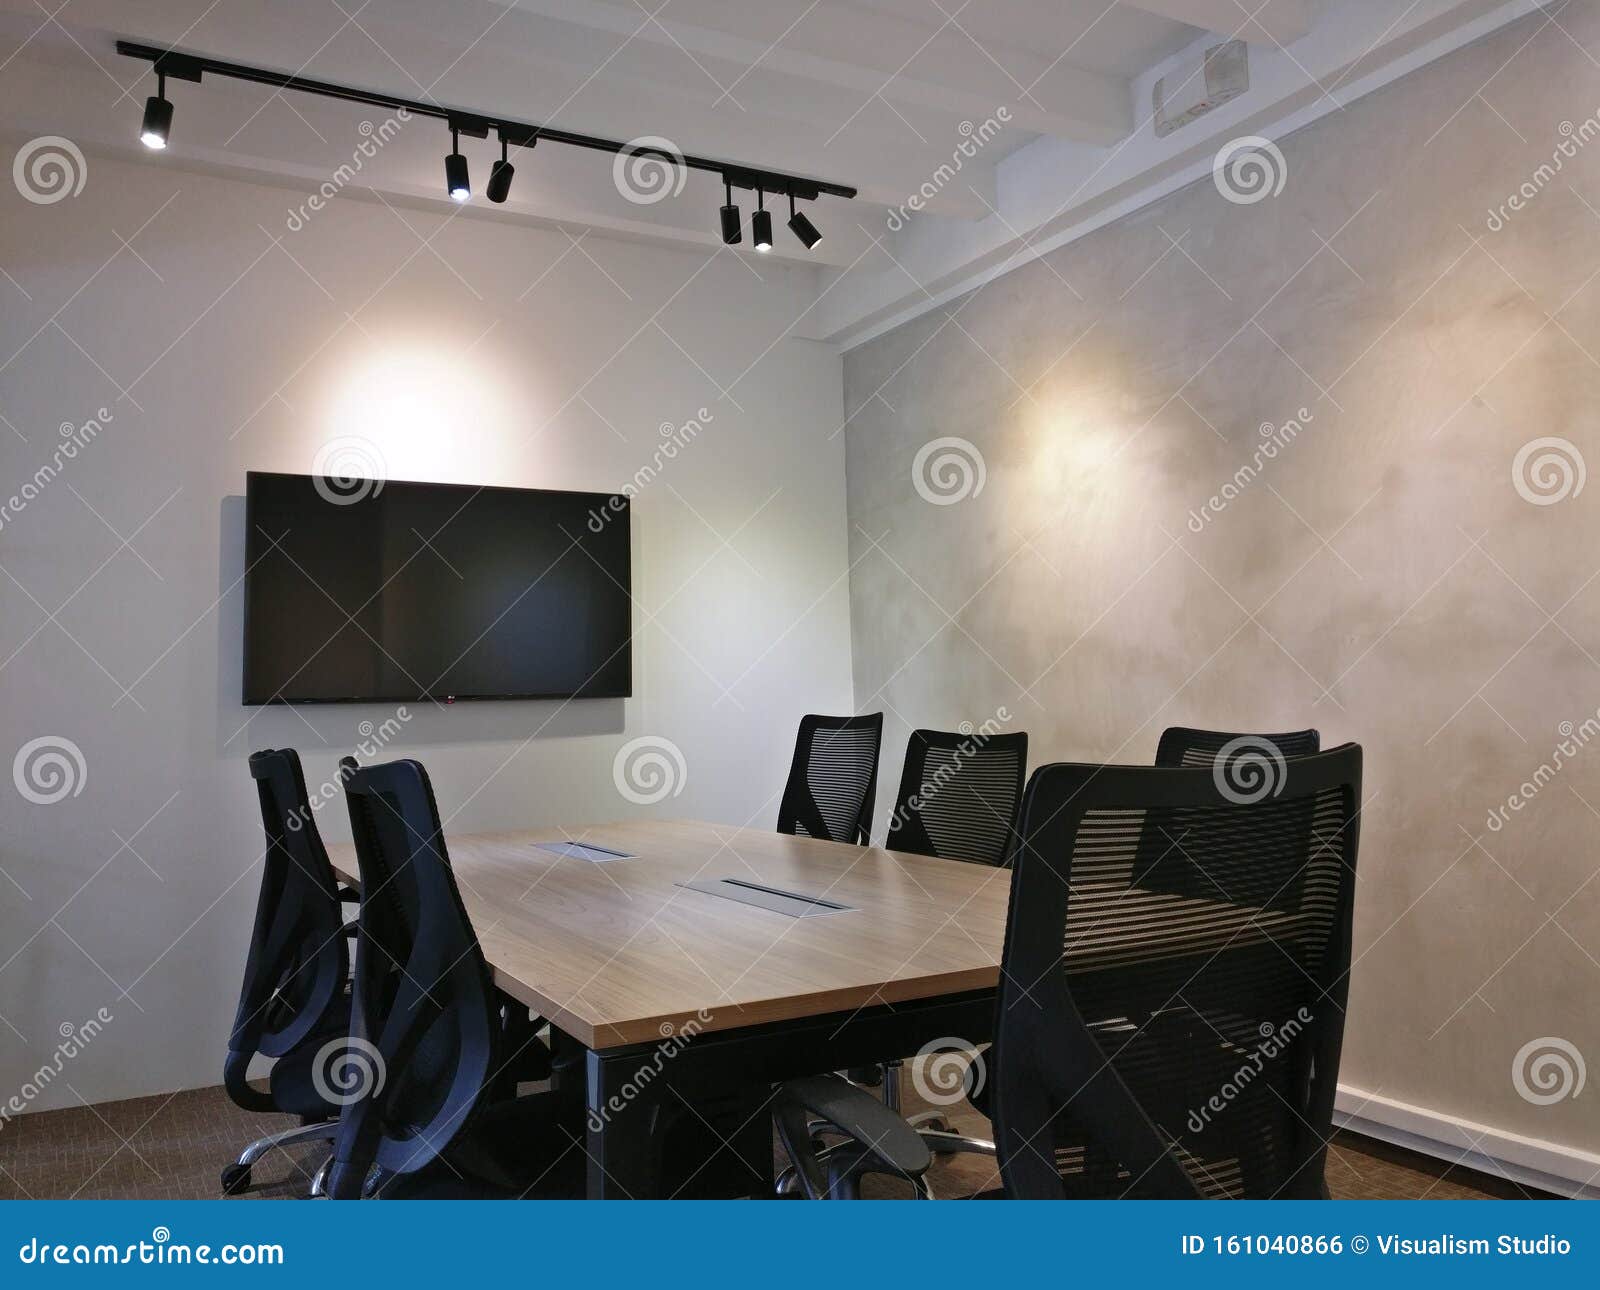 interior  of meeting rooms with black chairs and screens